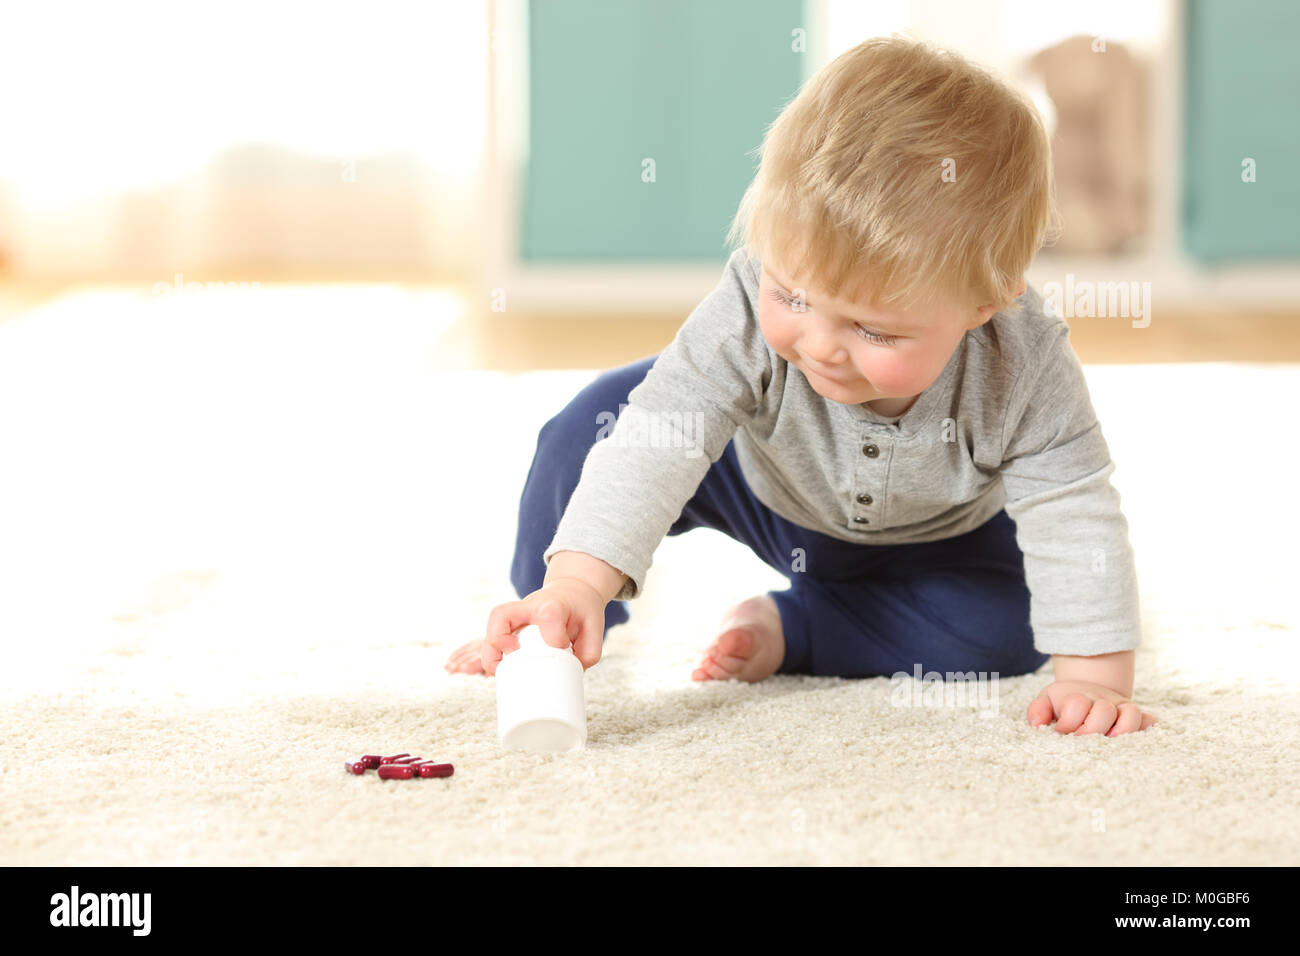 Baby in danger playing with a bottle of pills on the floor at home Stock Photo